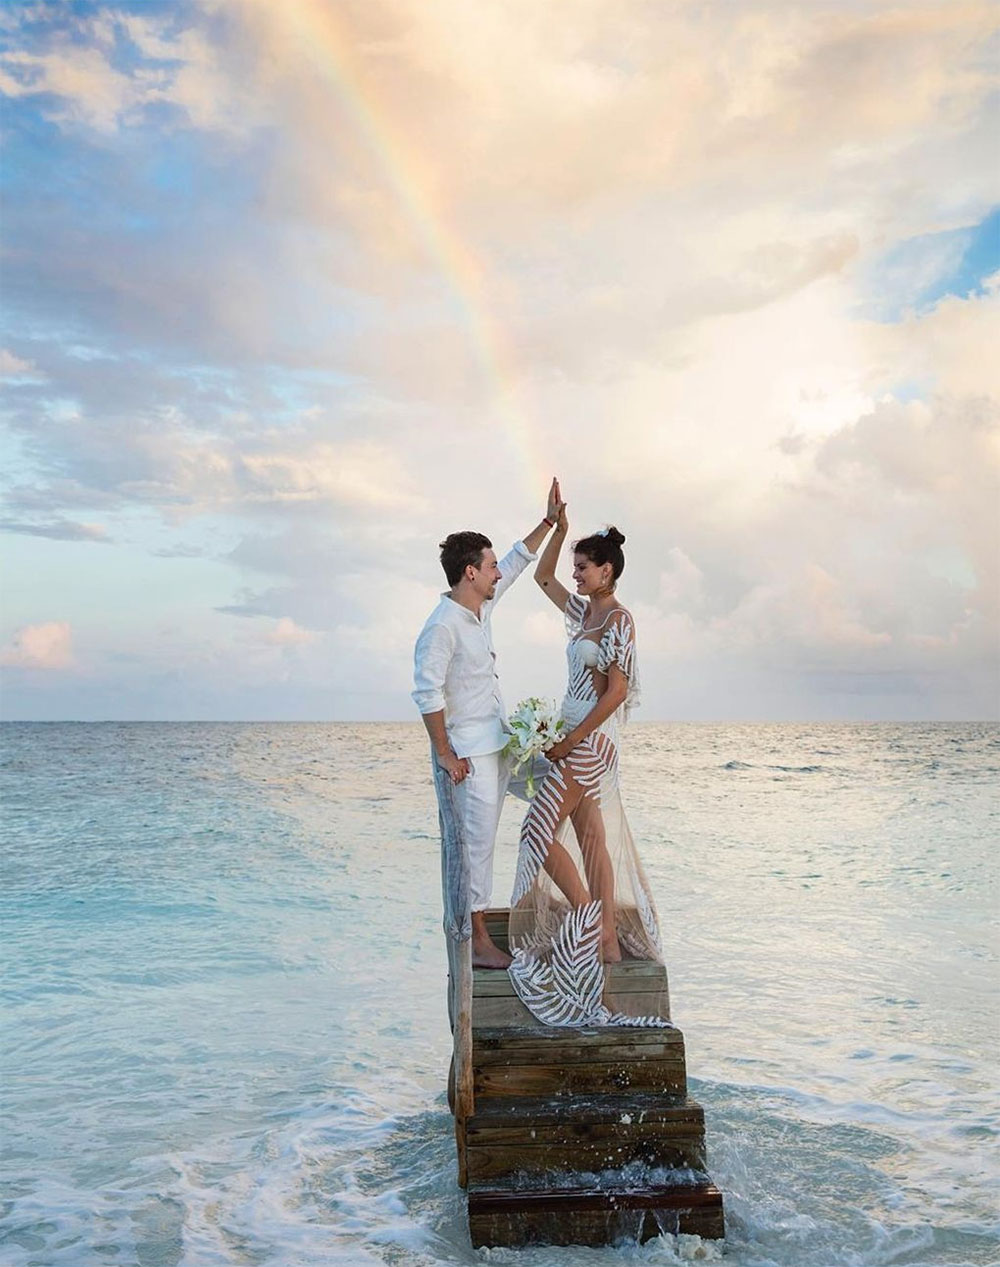 Brazilian-born supermodel beauty Isabeli Fontana got married - in a see-through Água de Coco gown, complete with a bikini underneath - to singer Diego Ferrero. The exclusive ceremony was held on the beach at the Soneva Fushi resort in the Maldives. Luxe!